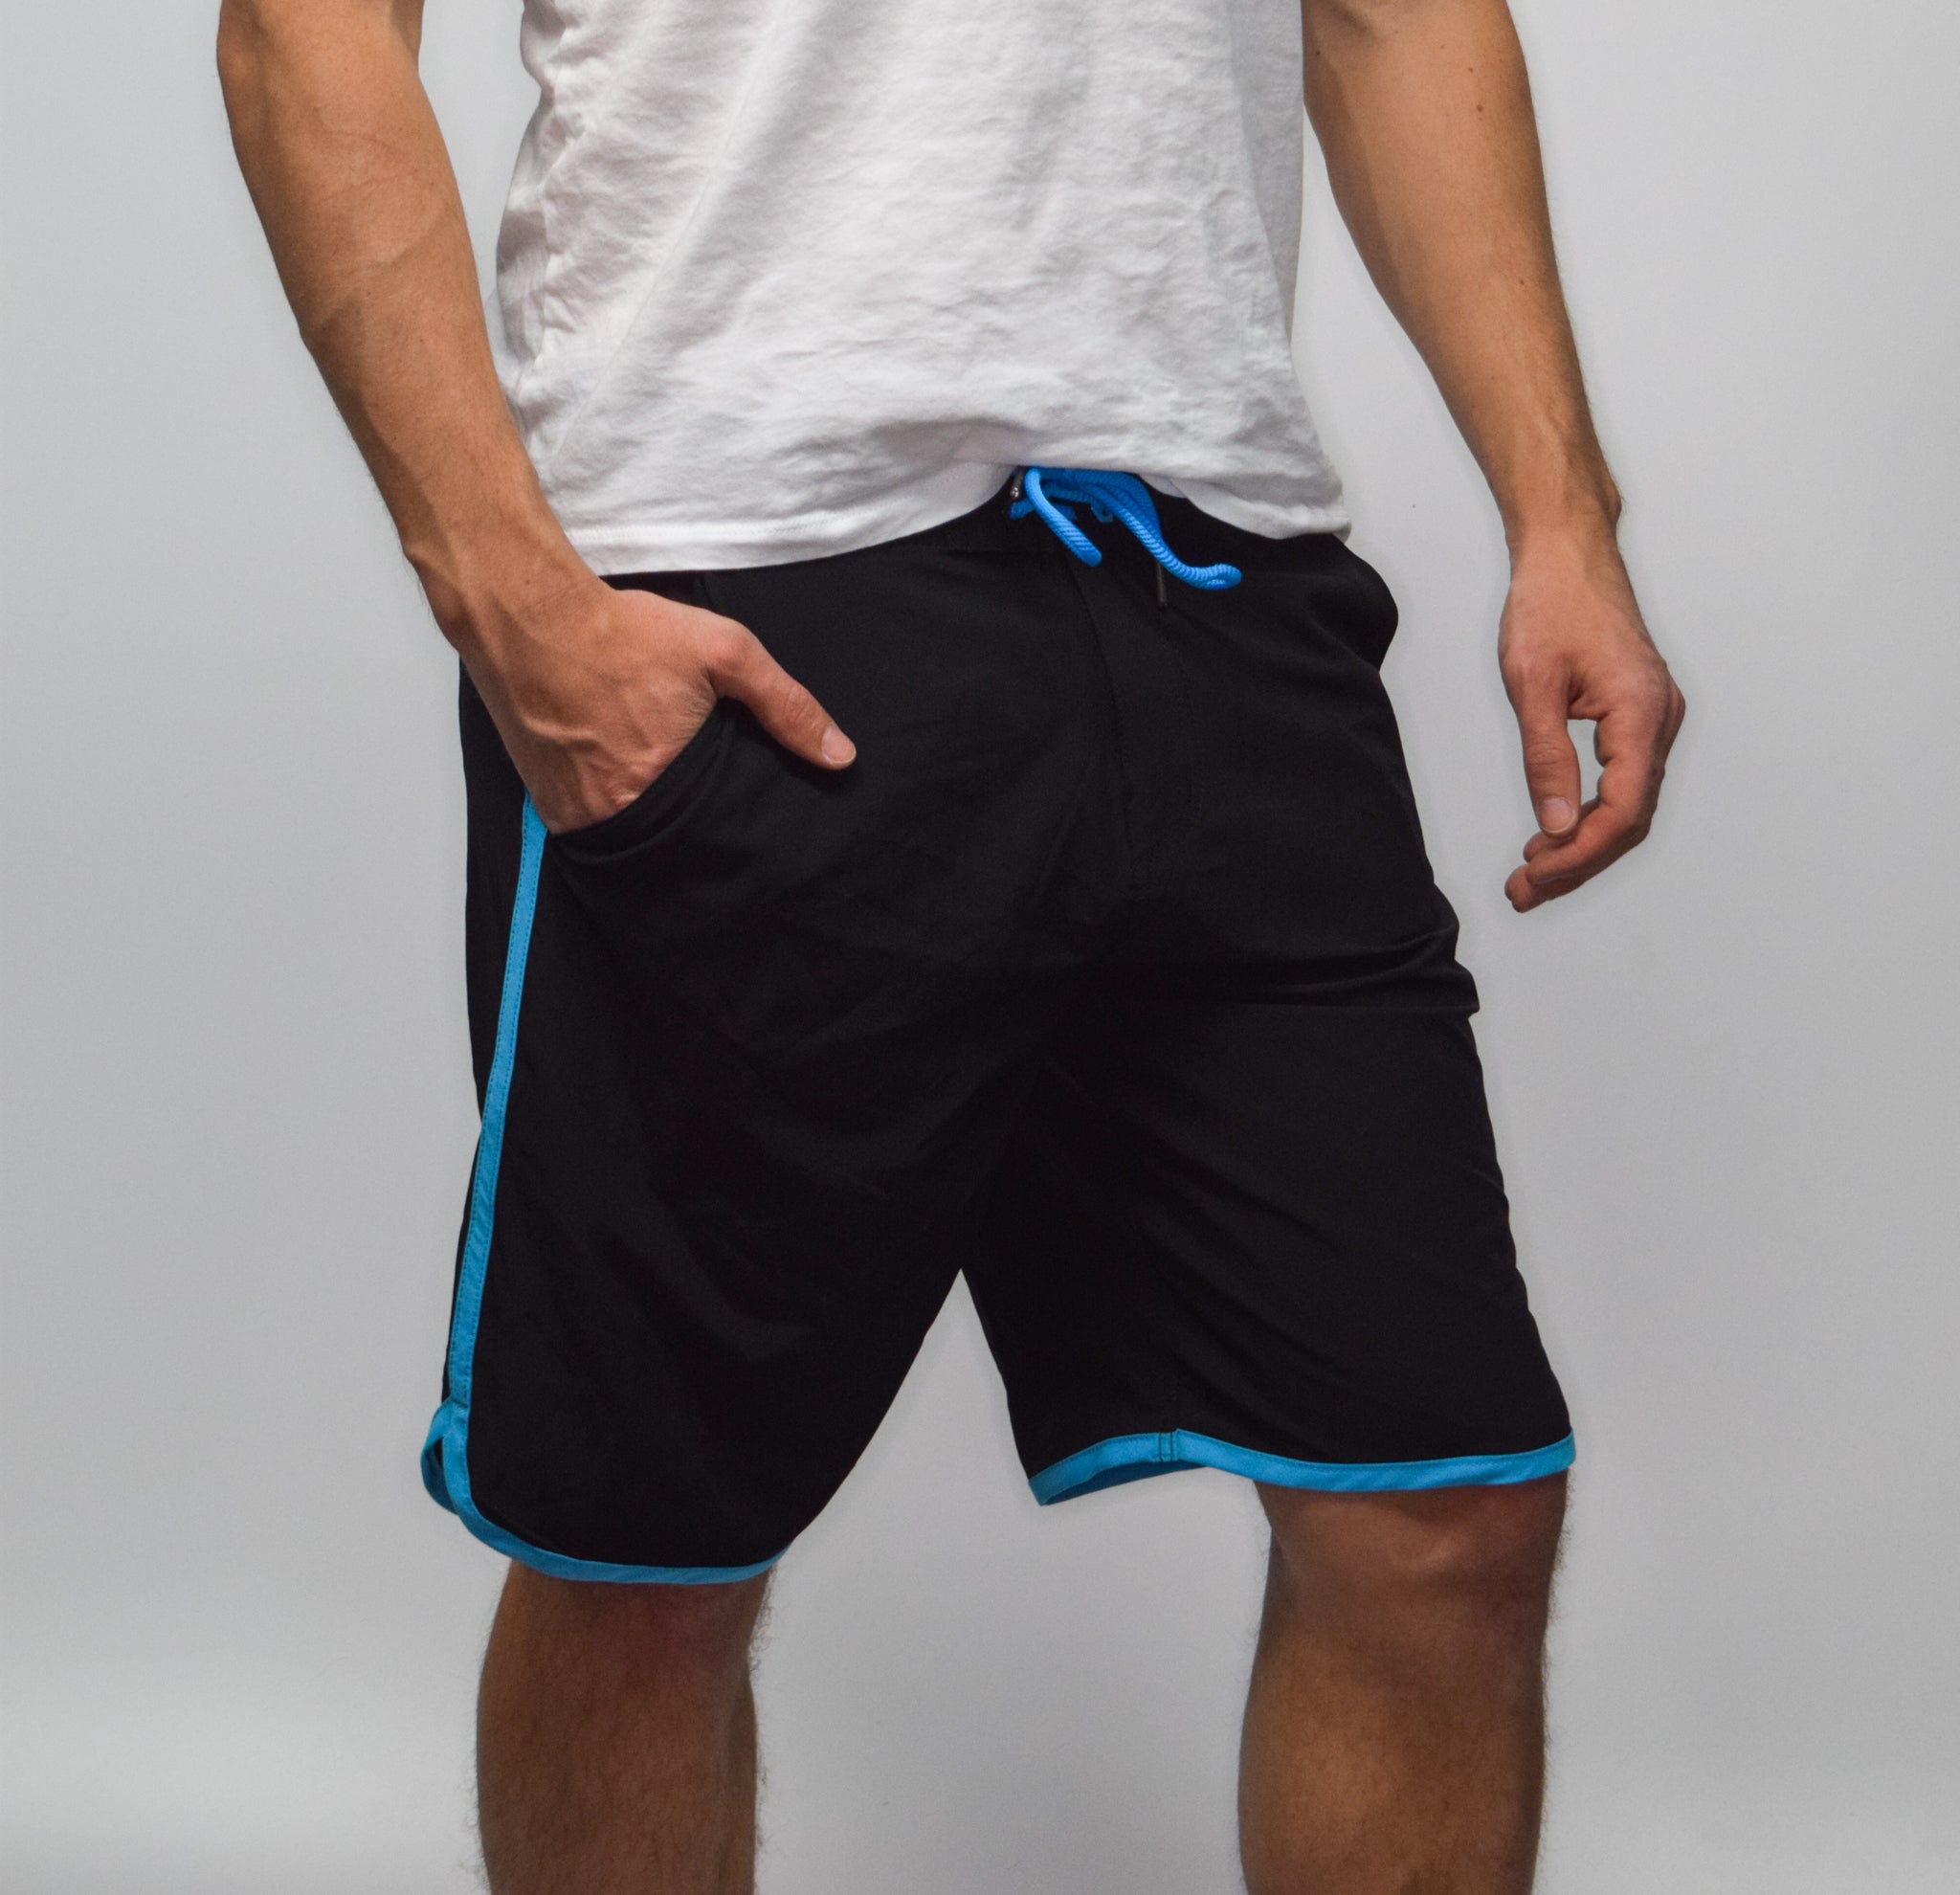 Men’s Competition Hybrid Shorts in Blue